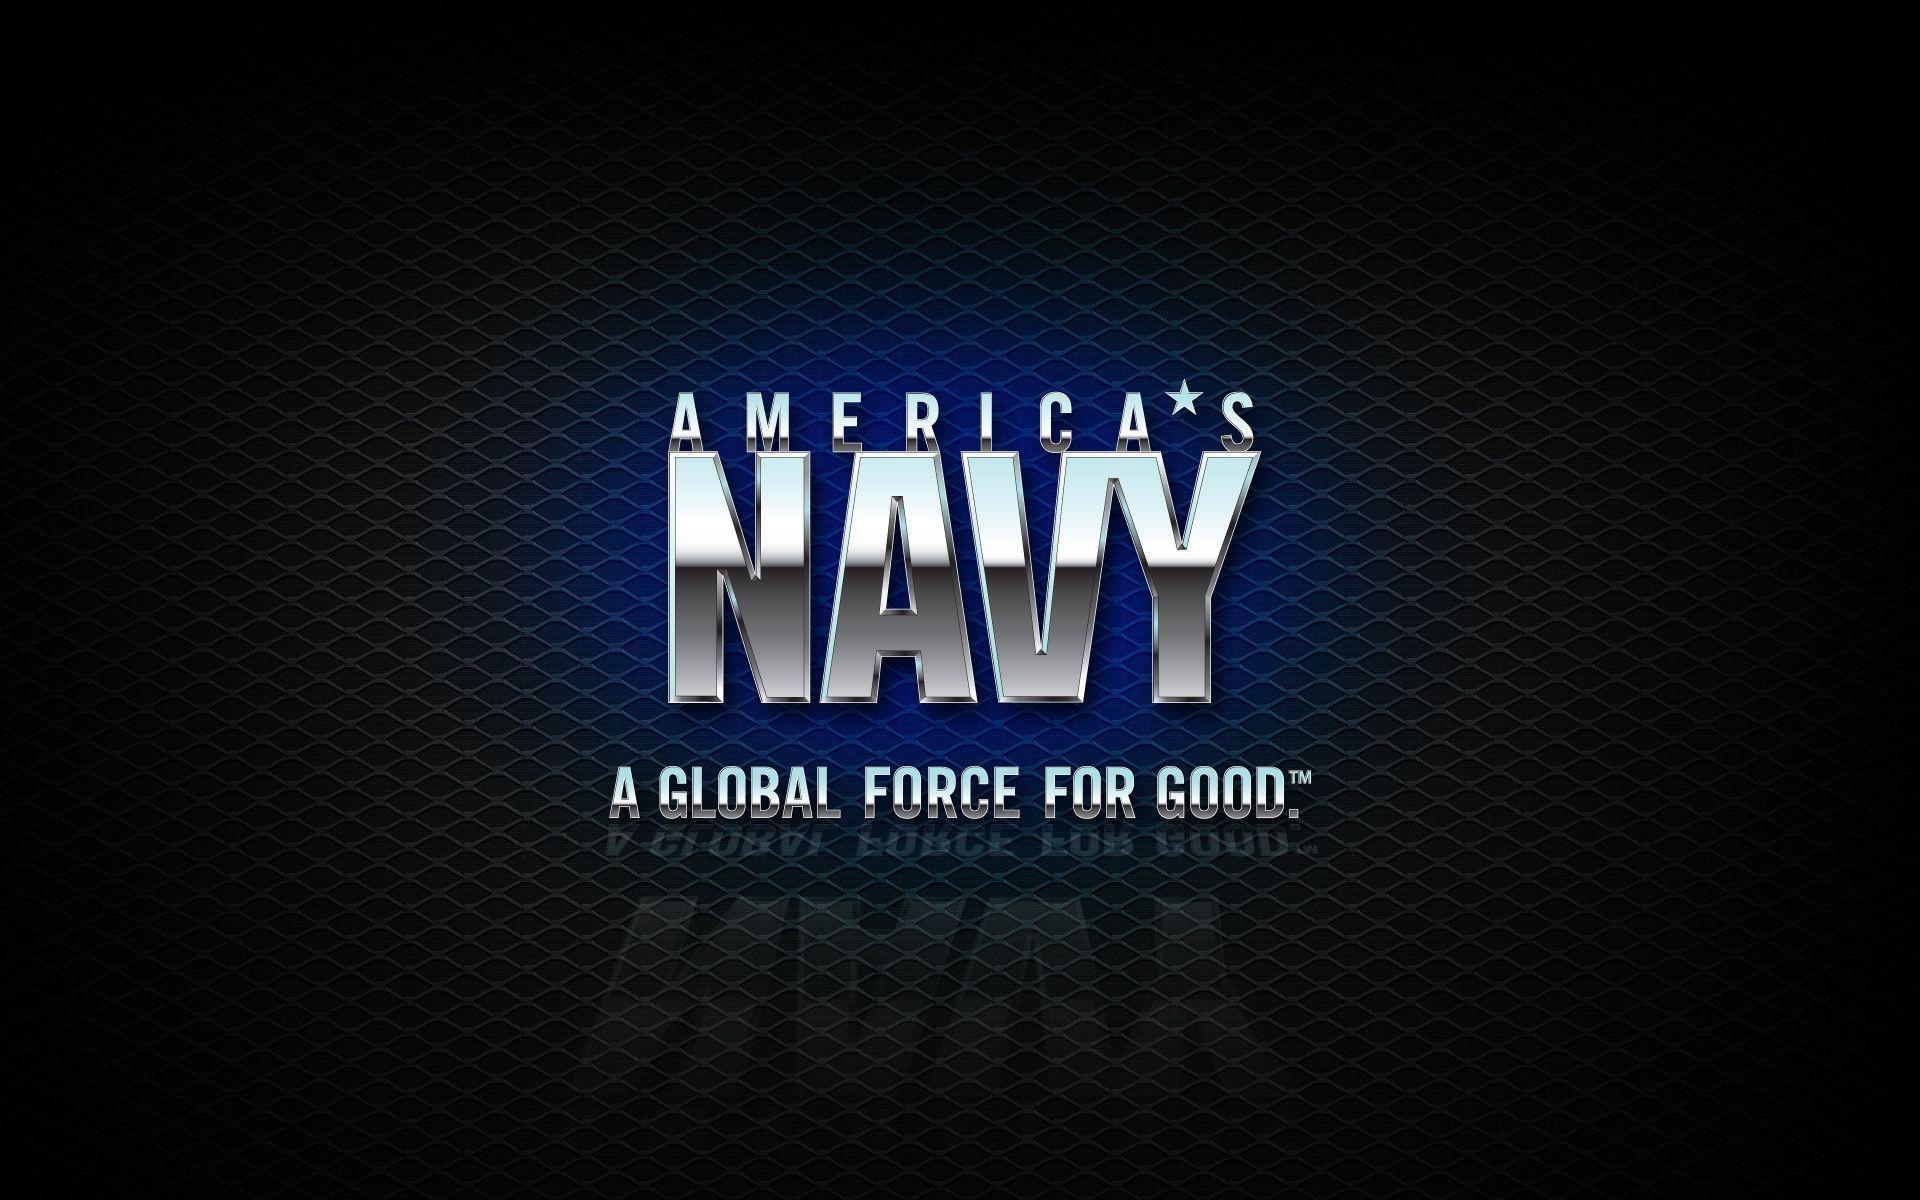 What does the U.S. Navy logo look like?